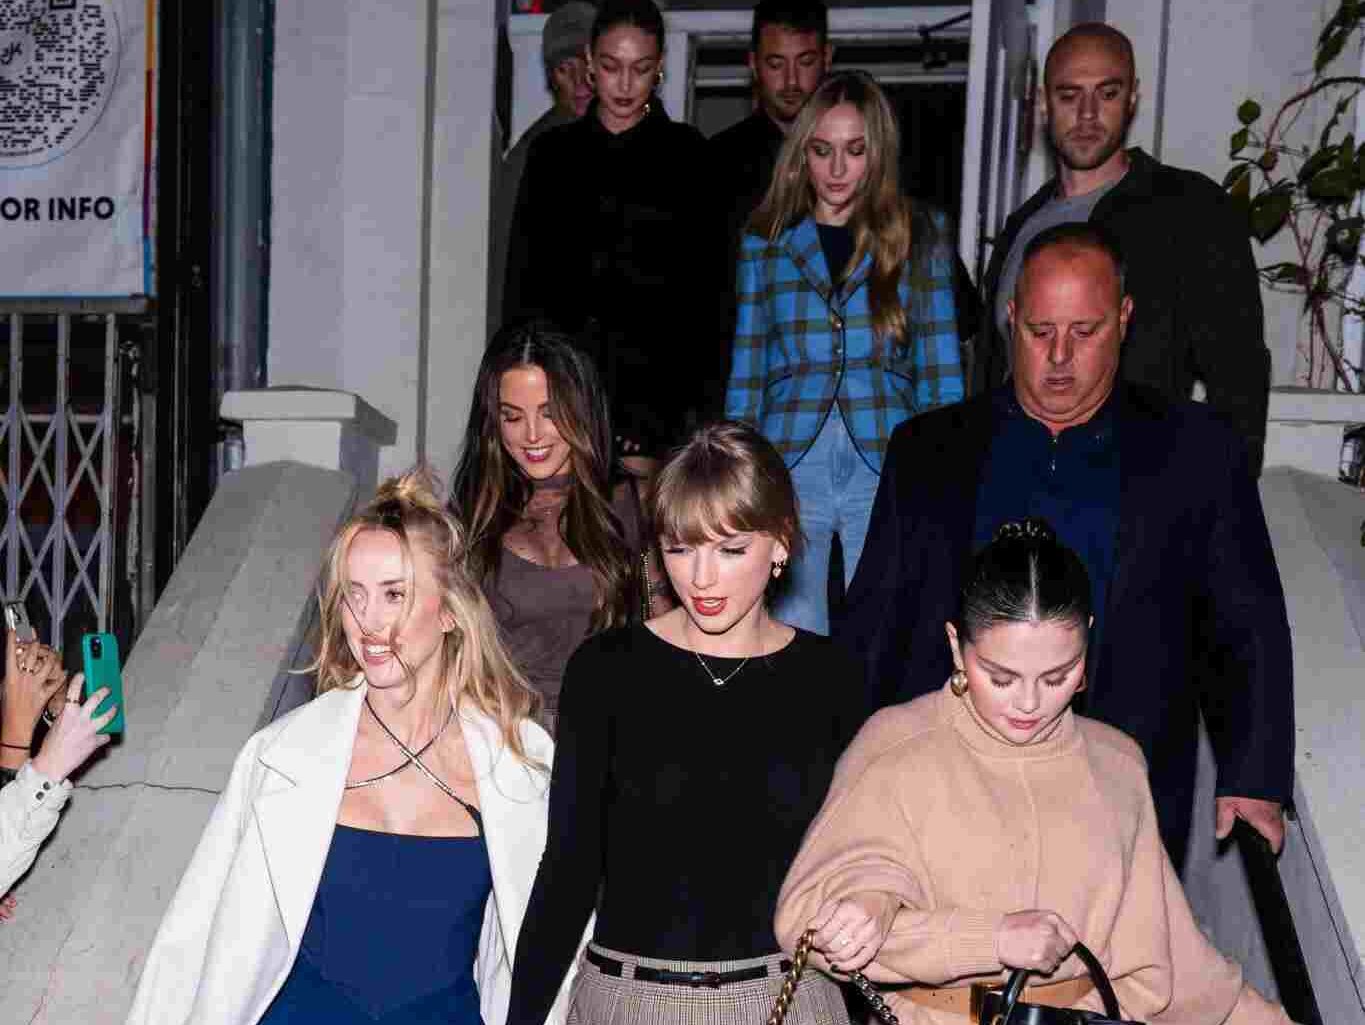 Brittany Mahomes, Taylor Swift, Selena Gomez, and in the back Sophie Turner, Gigi Hadid 